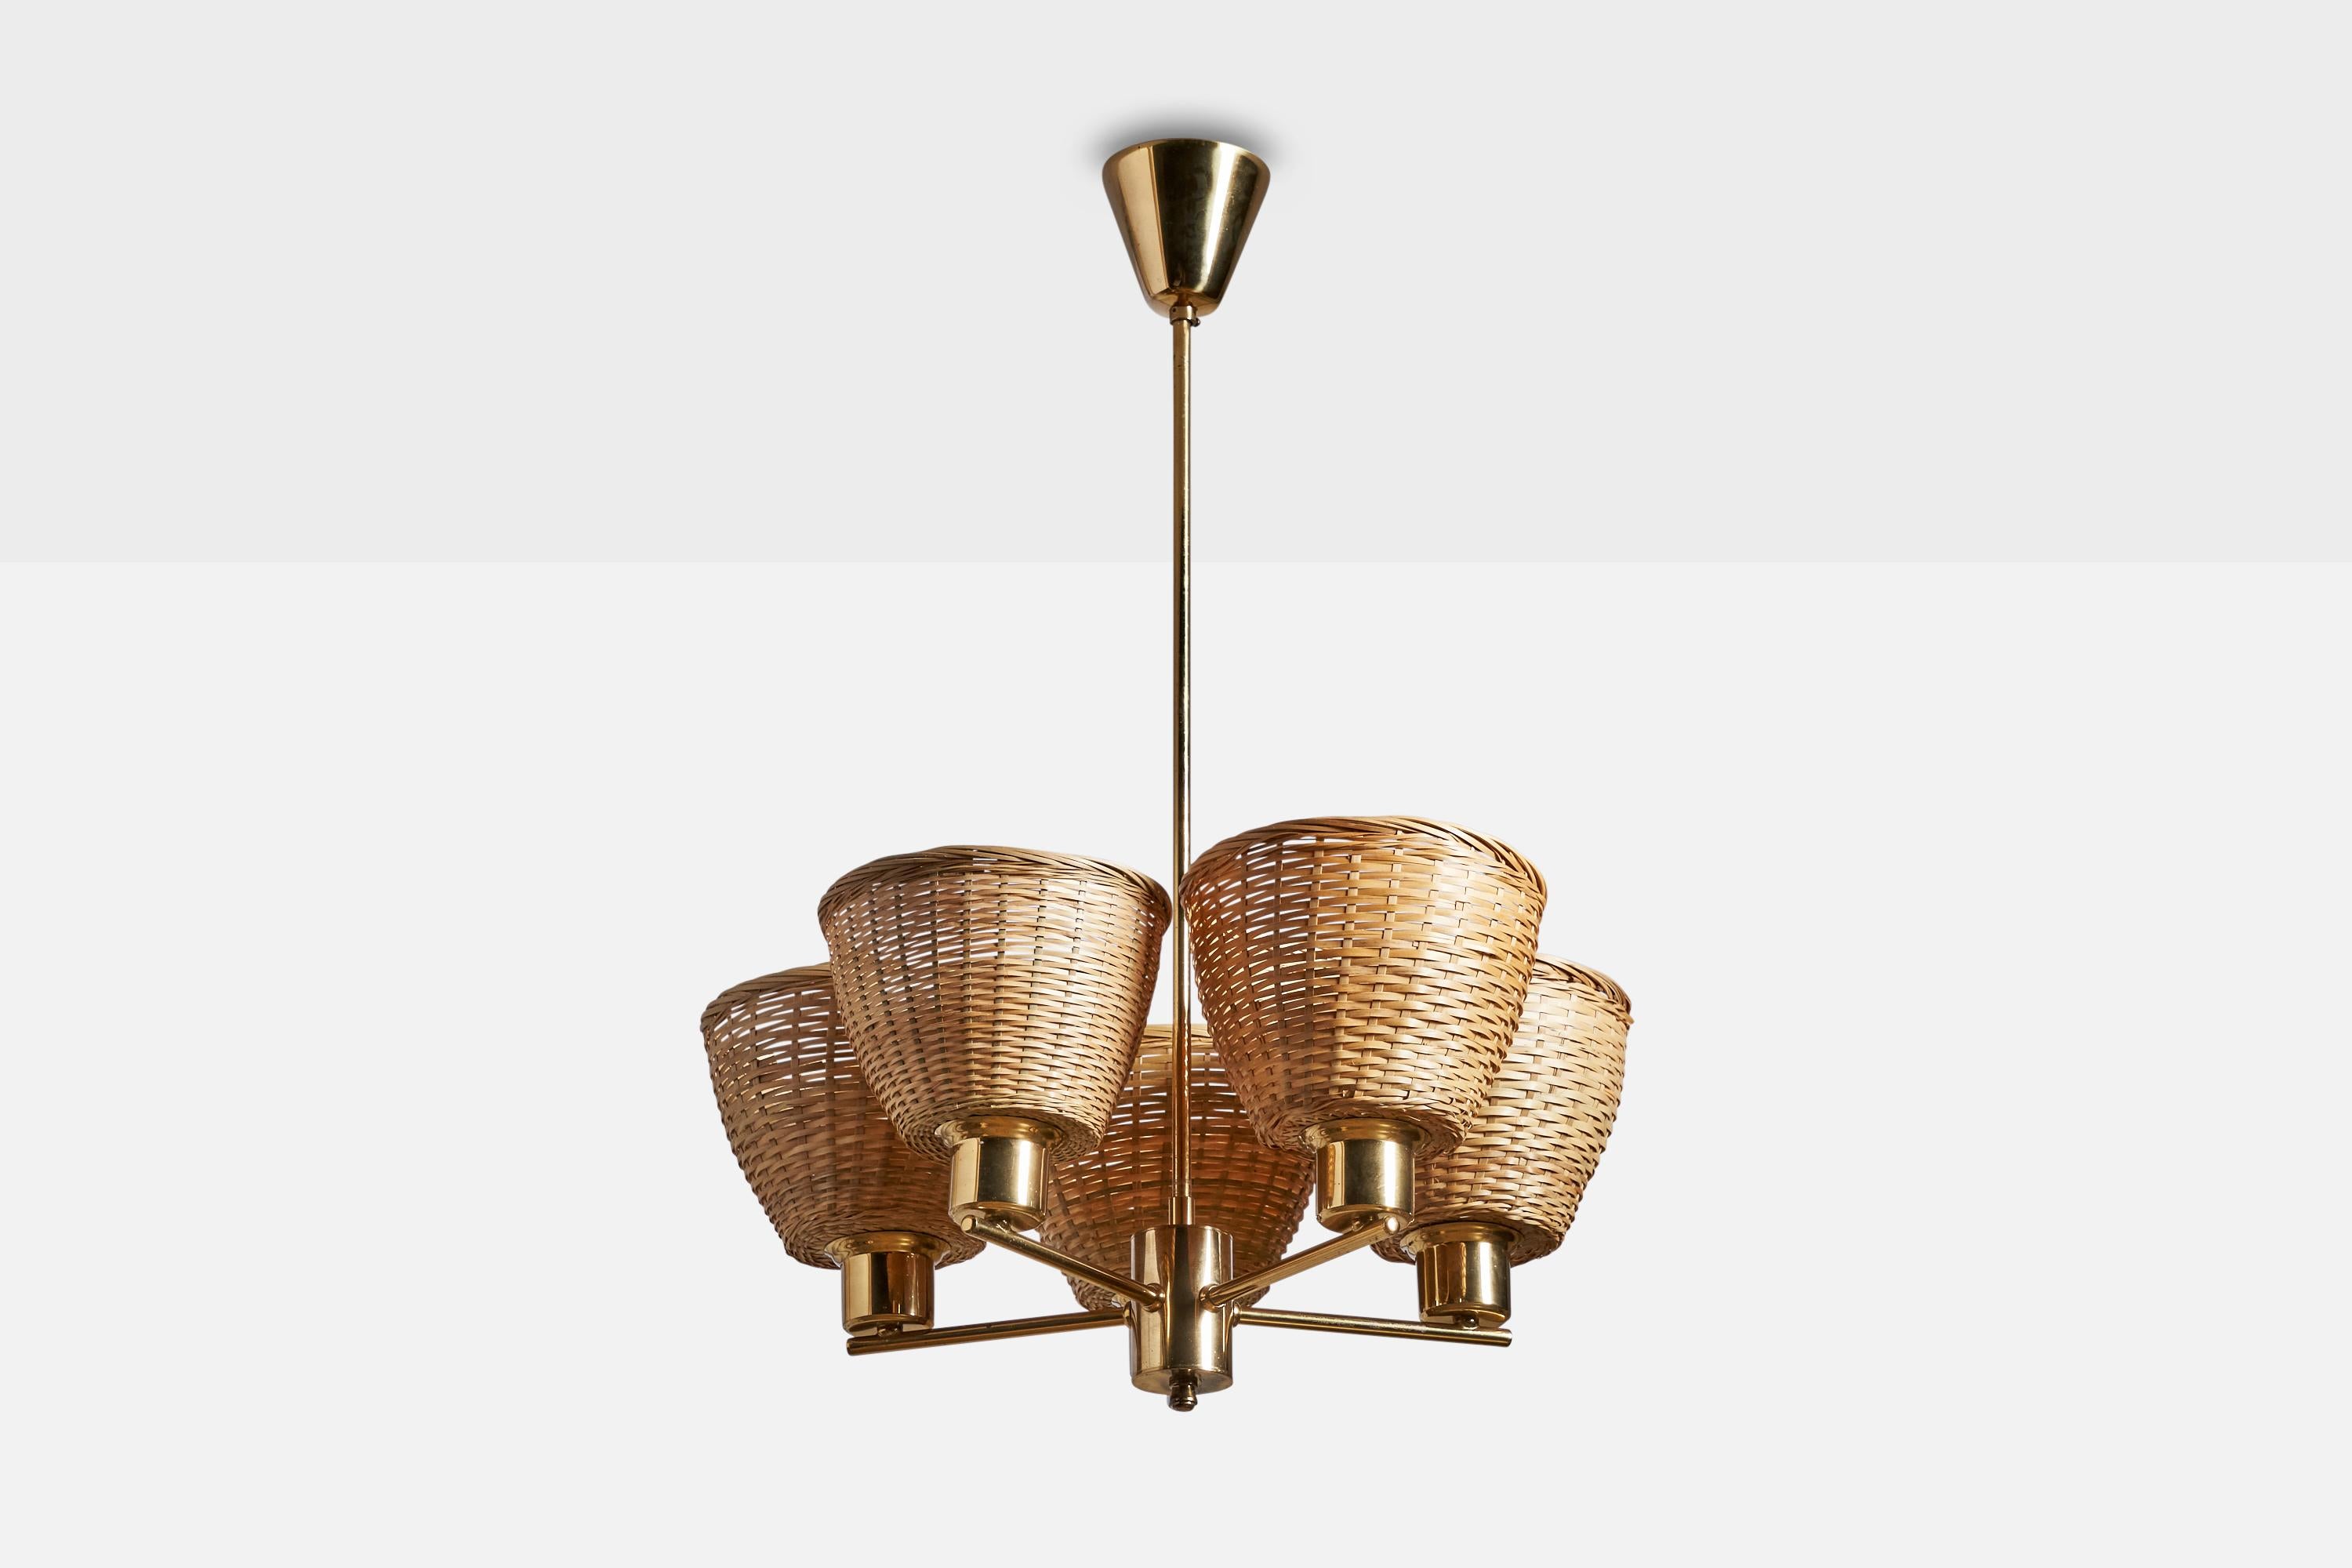 A brass and rattan chandelier designed and produced in Sweden, 1960s.

Dimensions of canopy (inches): 3” H x 3.25” Diameter
Socket takes standard E-26 bulbs. 5 sockets.There is no maximum wattage stated on the fixture. All lighting will be converted